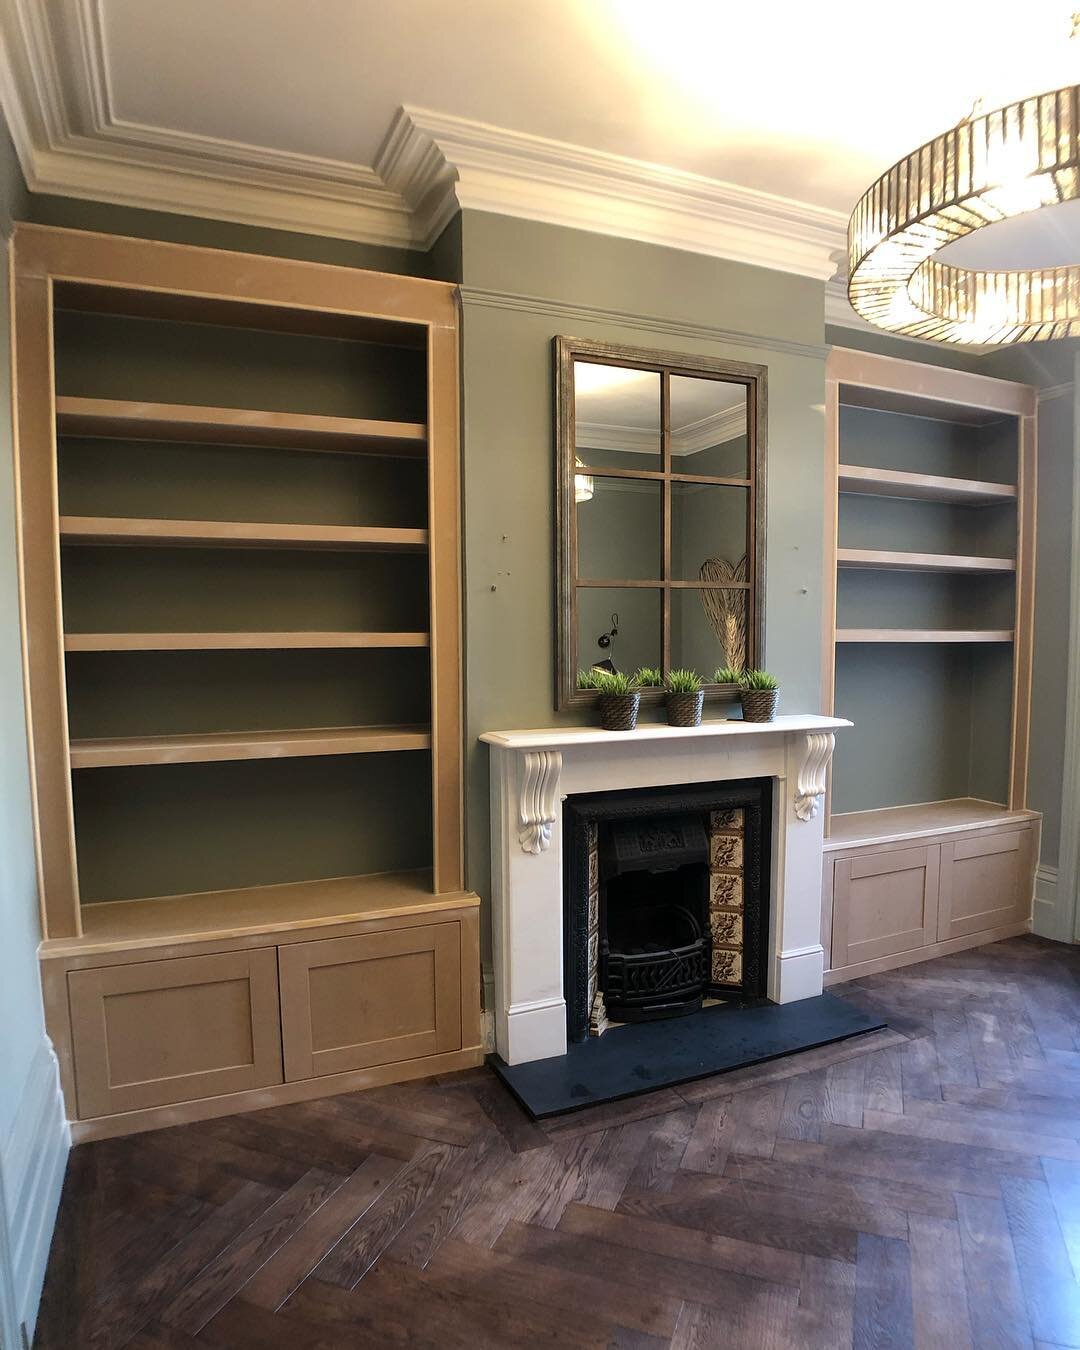 Some progress photos of the cabinet and shelving build in #Dulwich - Built for Interior designer Lucy Hooker @a_dulwich_diary - Now prepped and ready to be primed and painted this week. Colour will be @farrowandball &lsquo;Pigeon&rsquo; finish will b